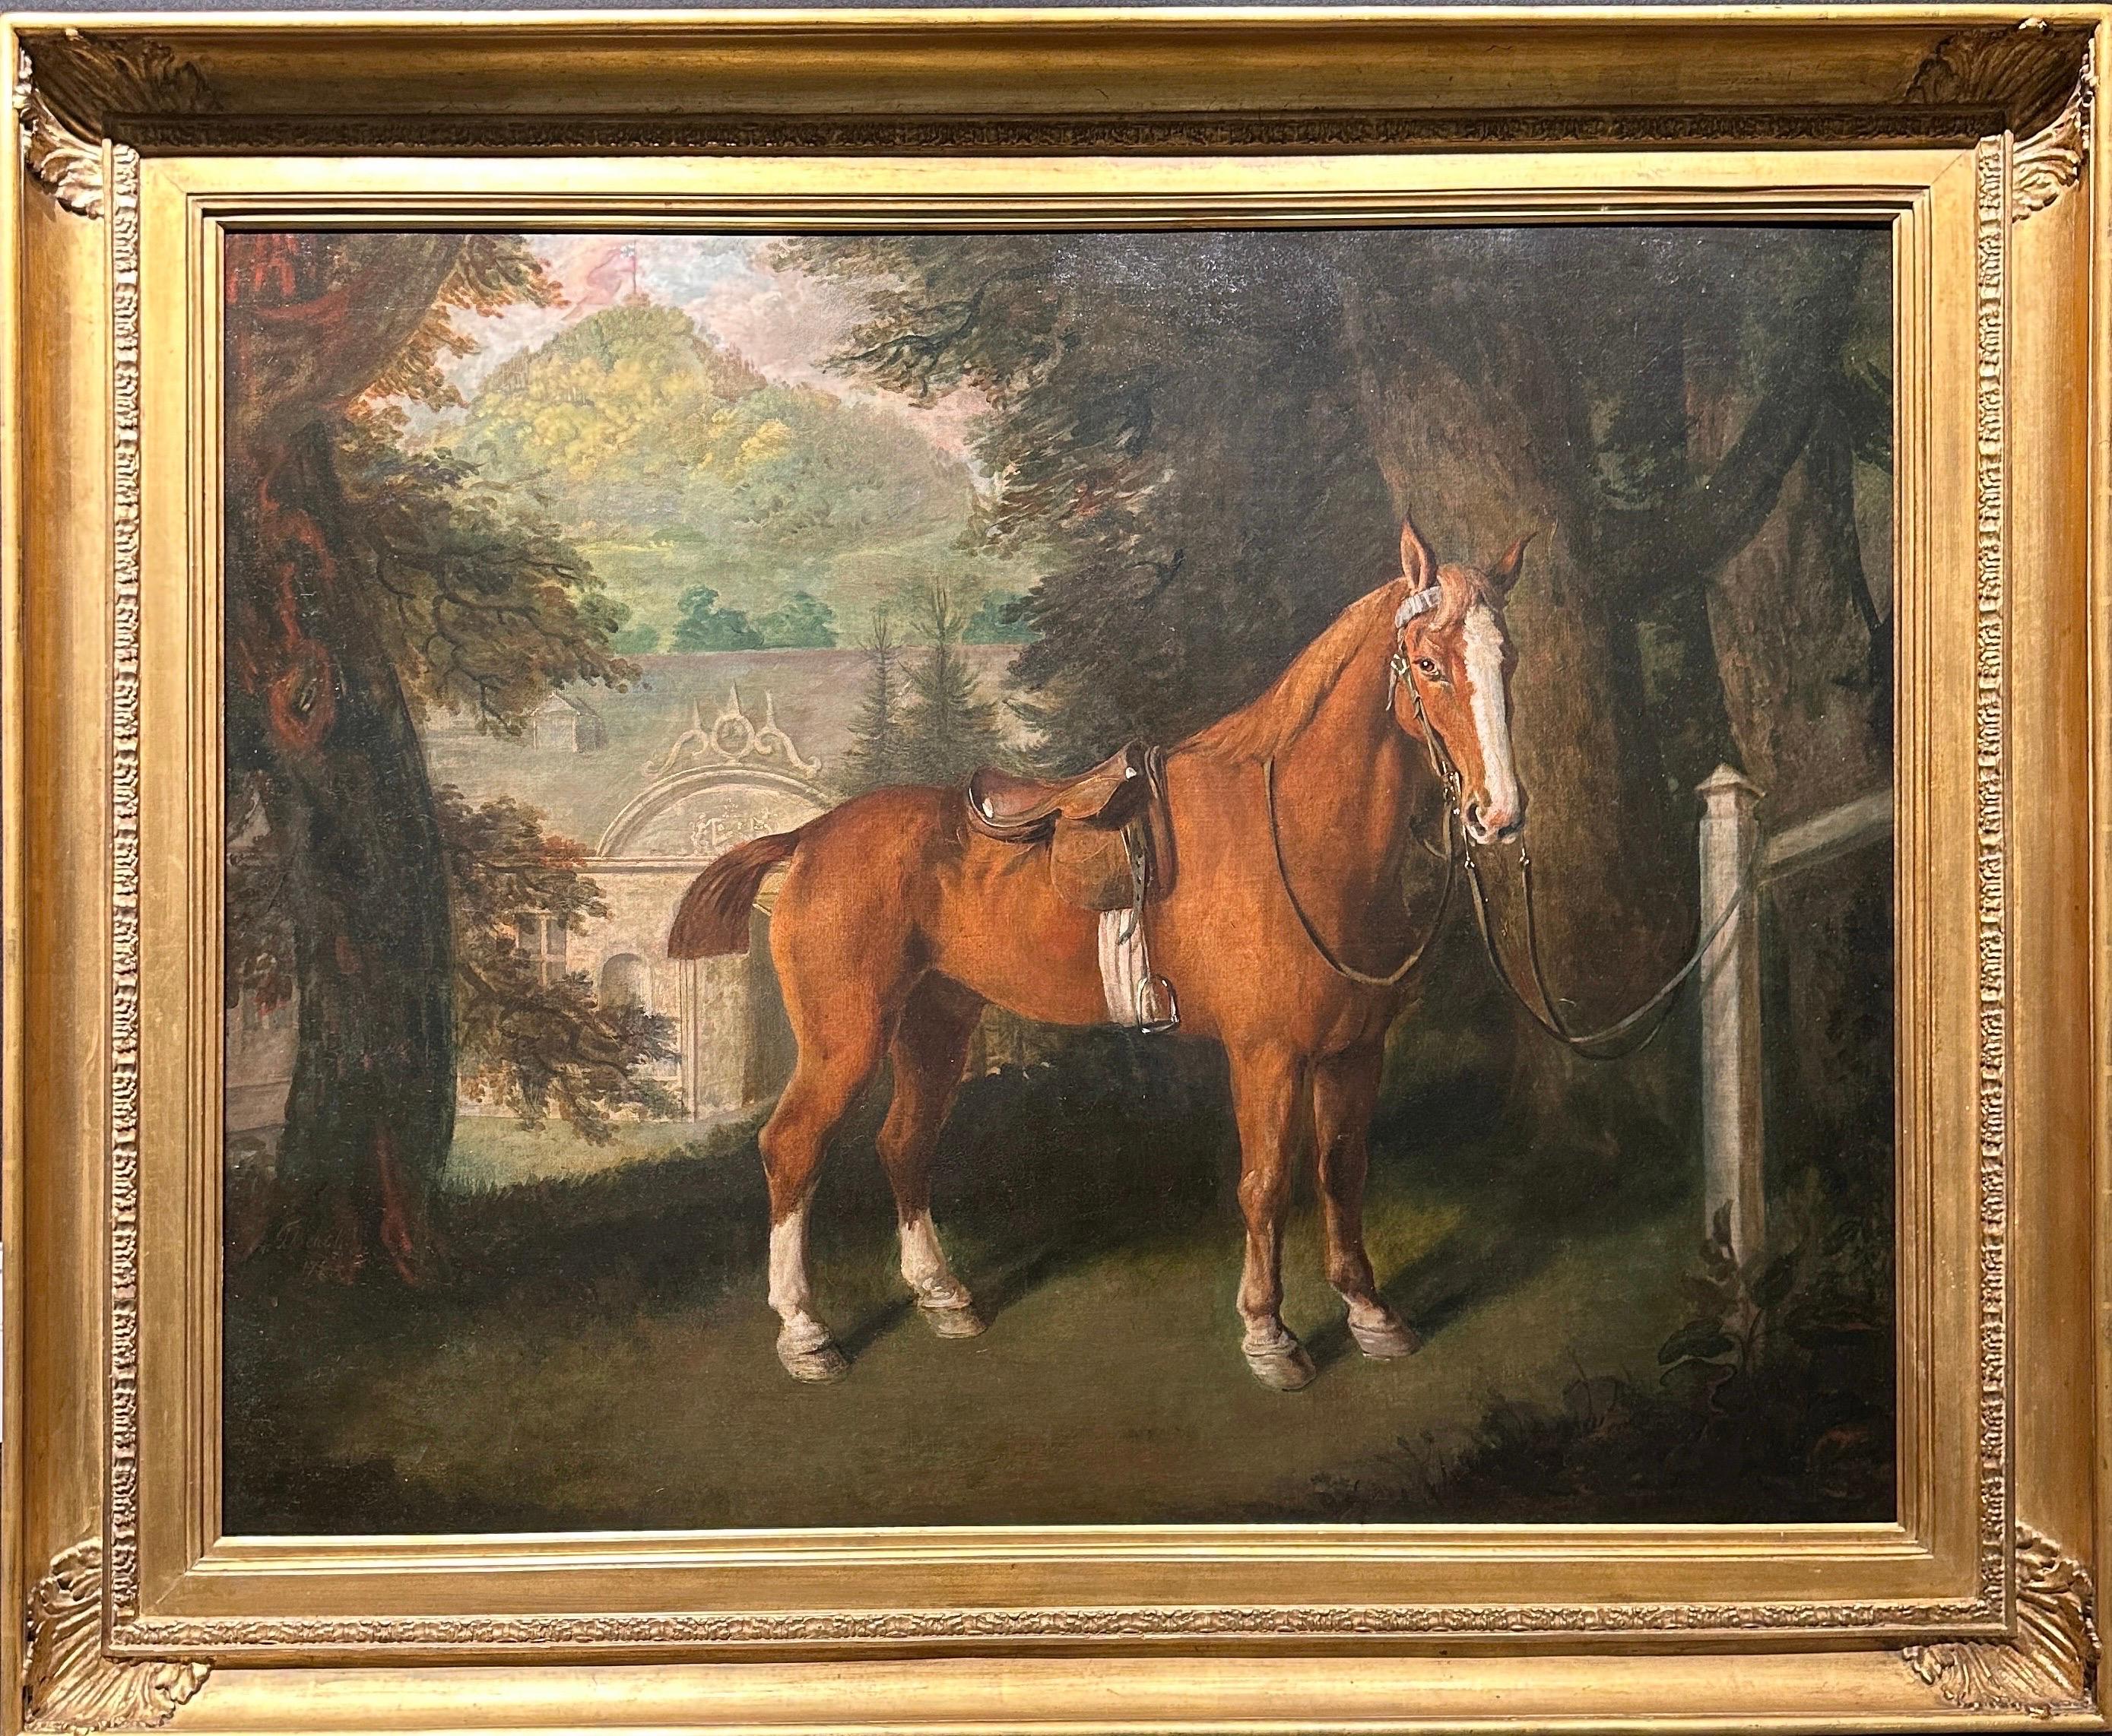 A large English 18th century painting of a Chestnut horse 